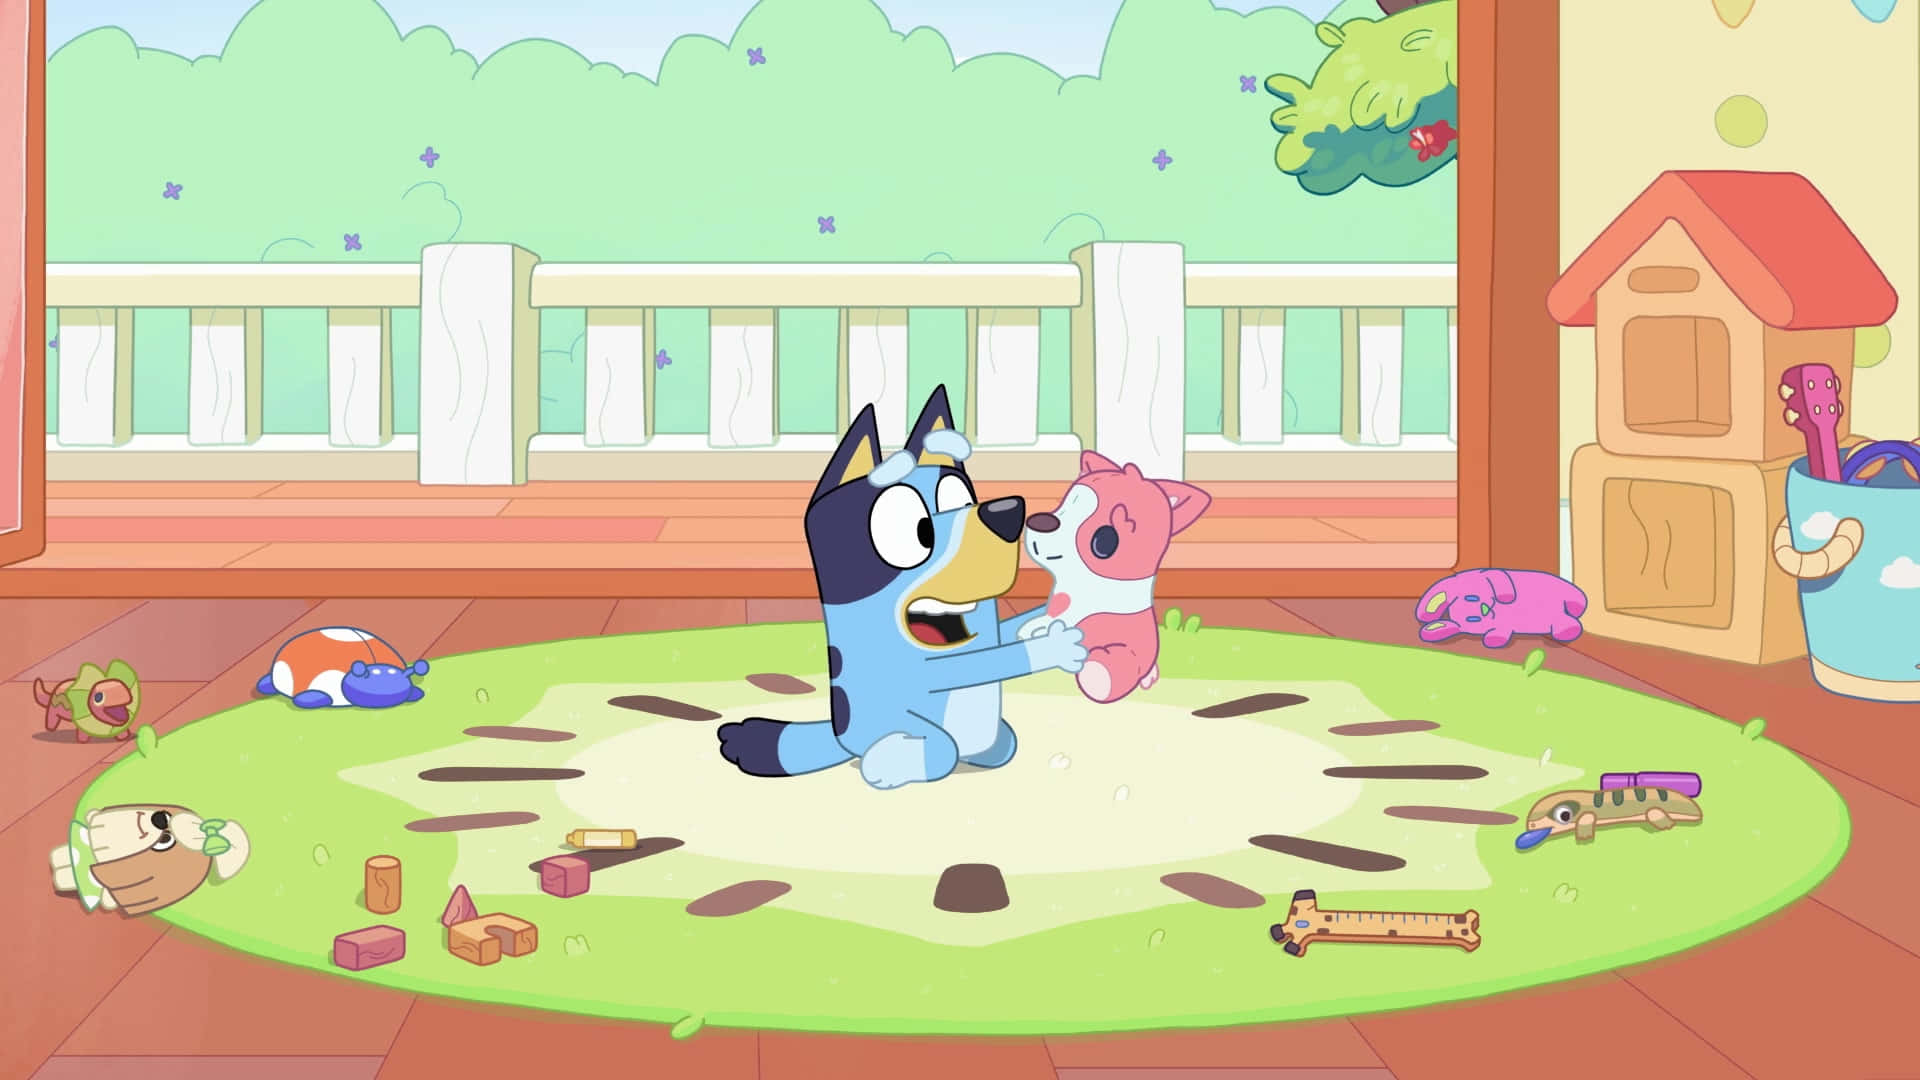 A Cartoon Dog Is Playing With Toys In A Room